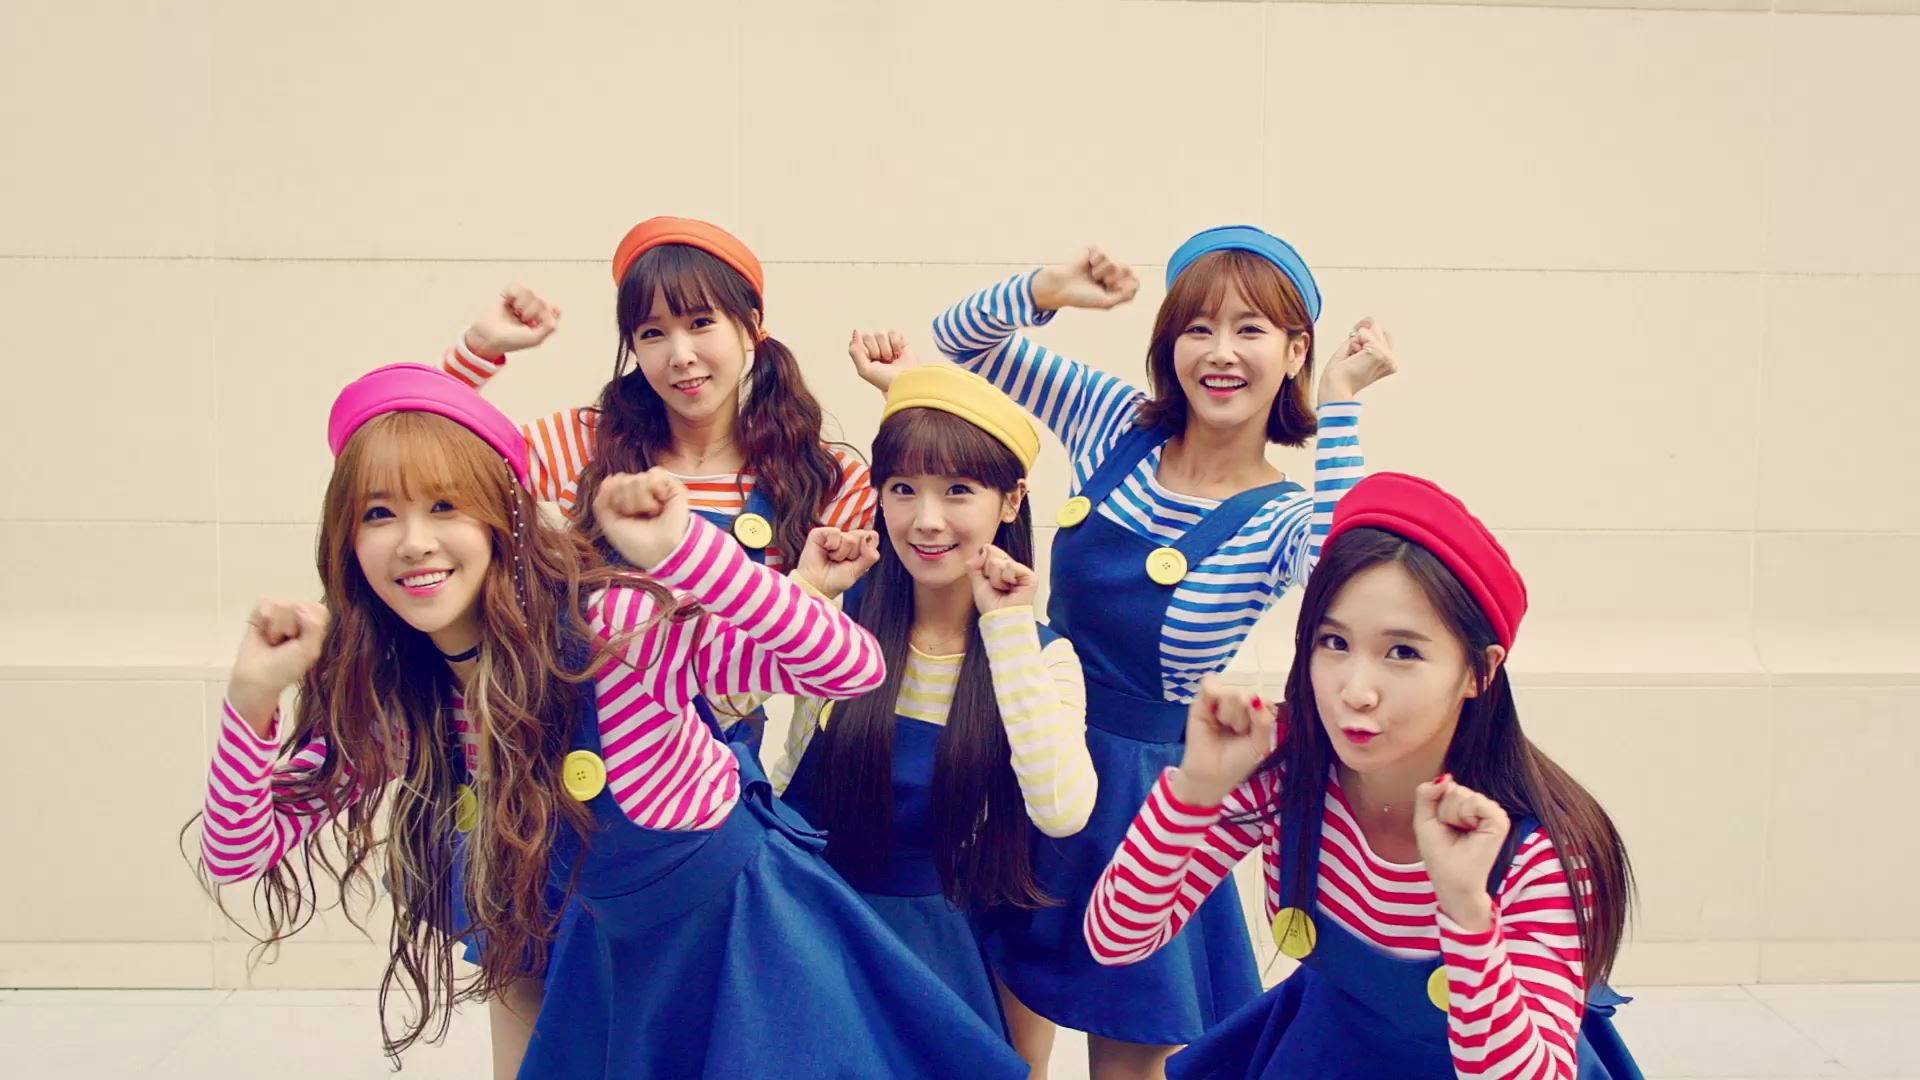 HQ CrayonPop Wallpapers | File 210.18Kb